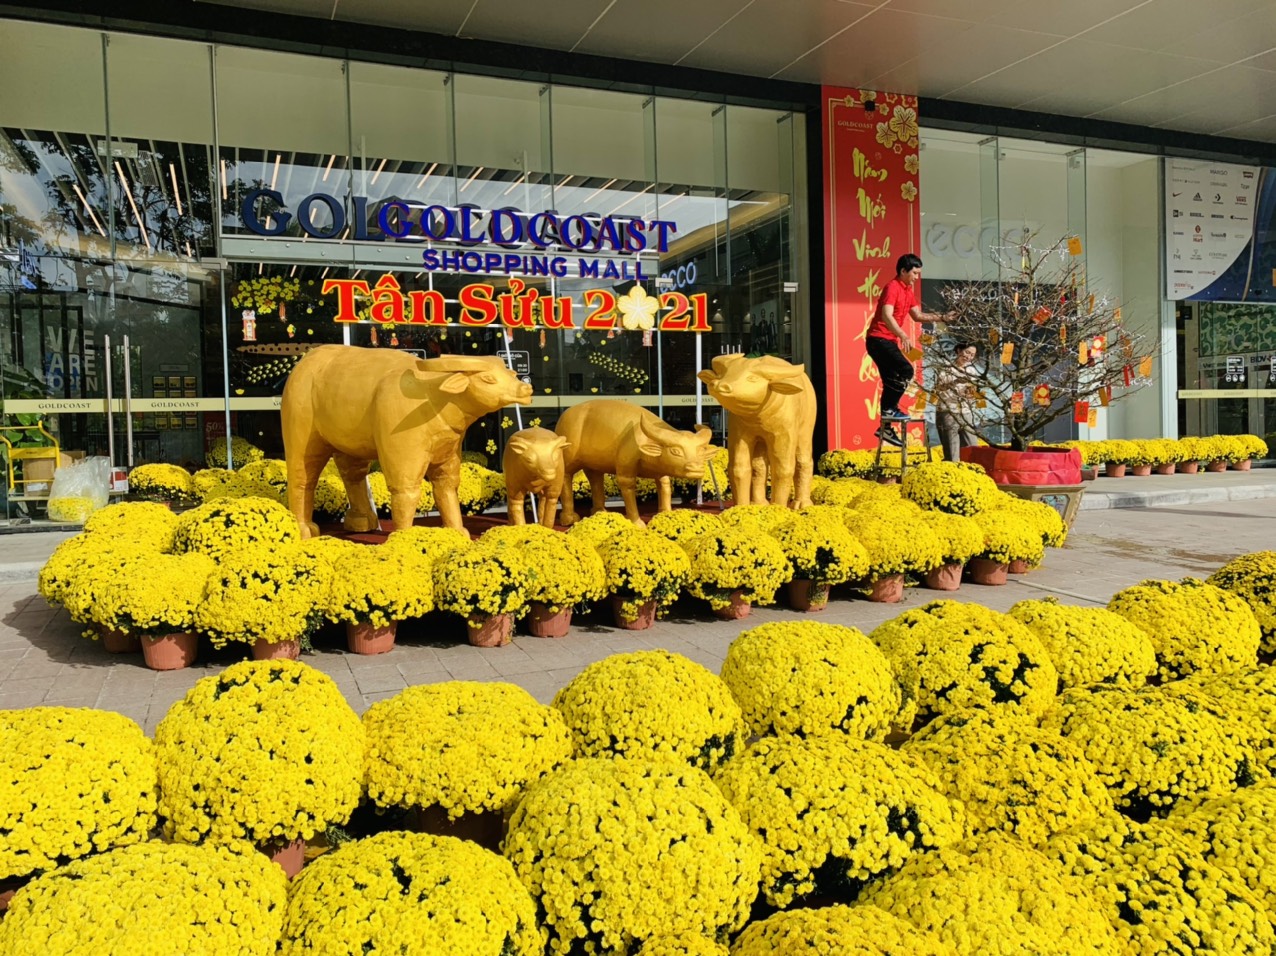 Chrysanthemums and golden statues of buffaloes, the zodiac symbol of Lunar New Year 2021 